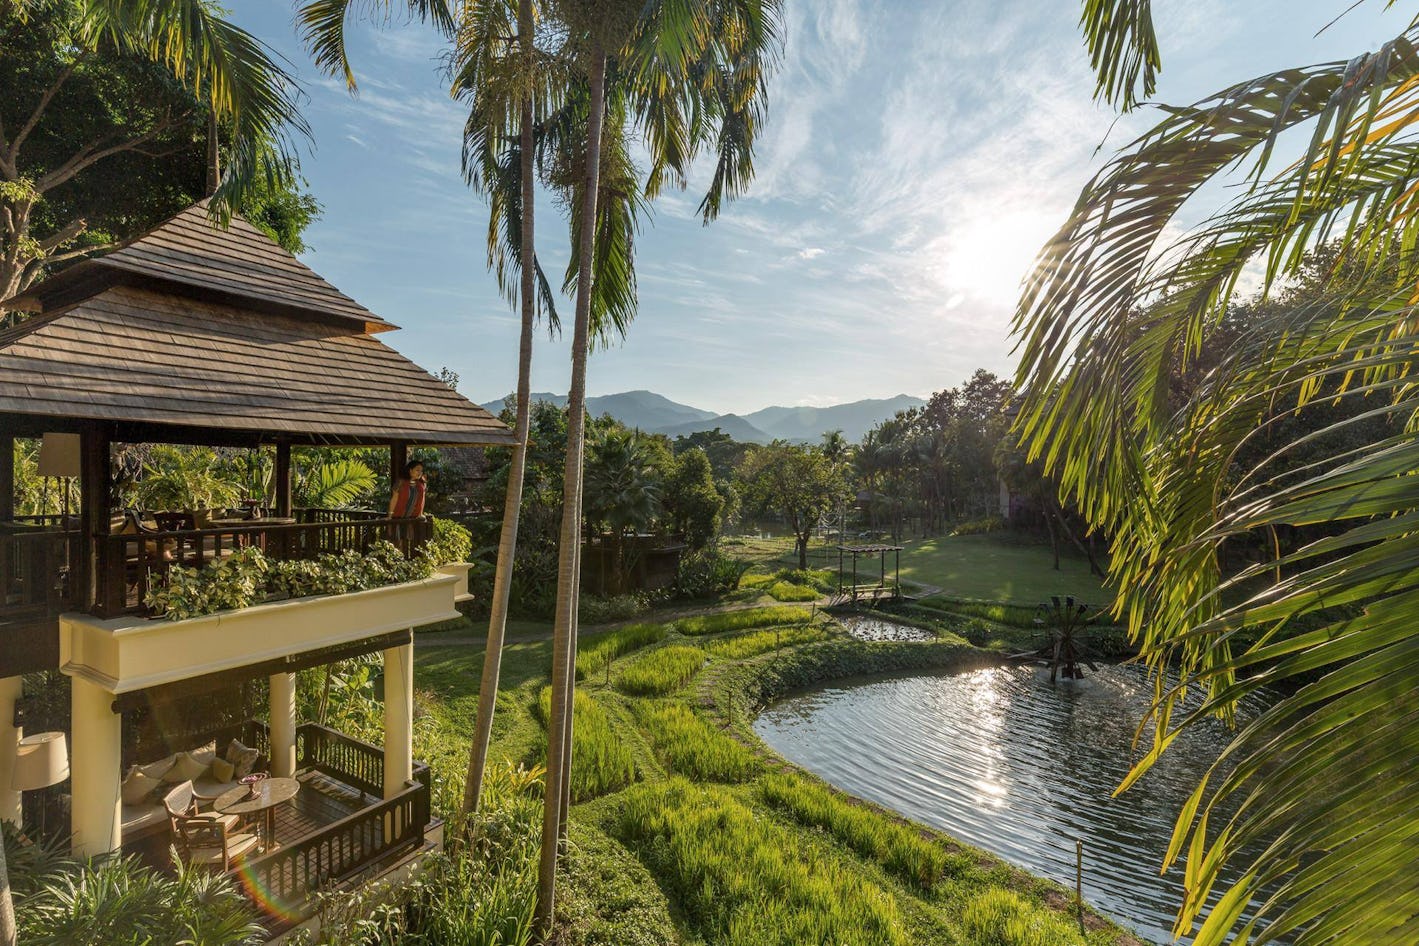 If the mention of Thailand conjures up visions of old-fashioned pavilions reflected in lotus ponds, palatial villas and foot massages enjoyed by an infinity pool, you won't be disappointed! Sheltered in one of northern Thailand's most scenic...